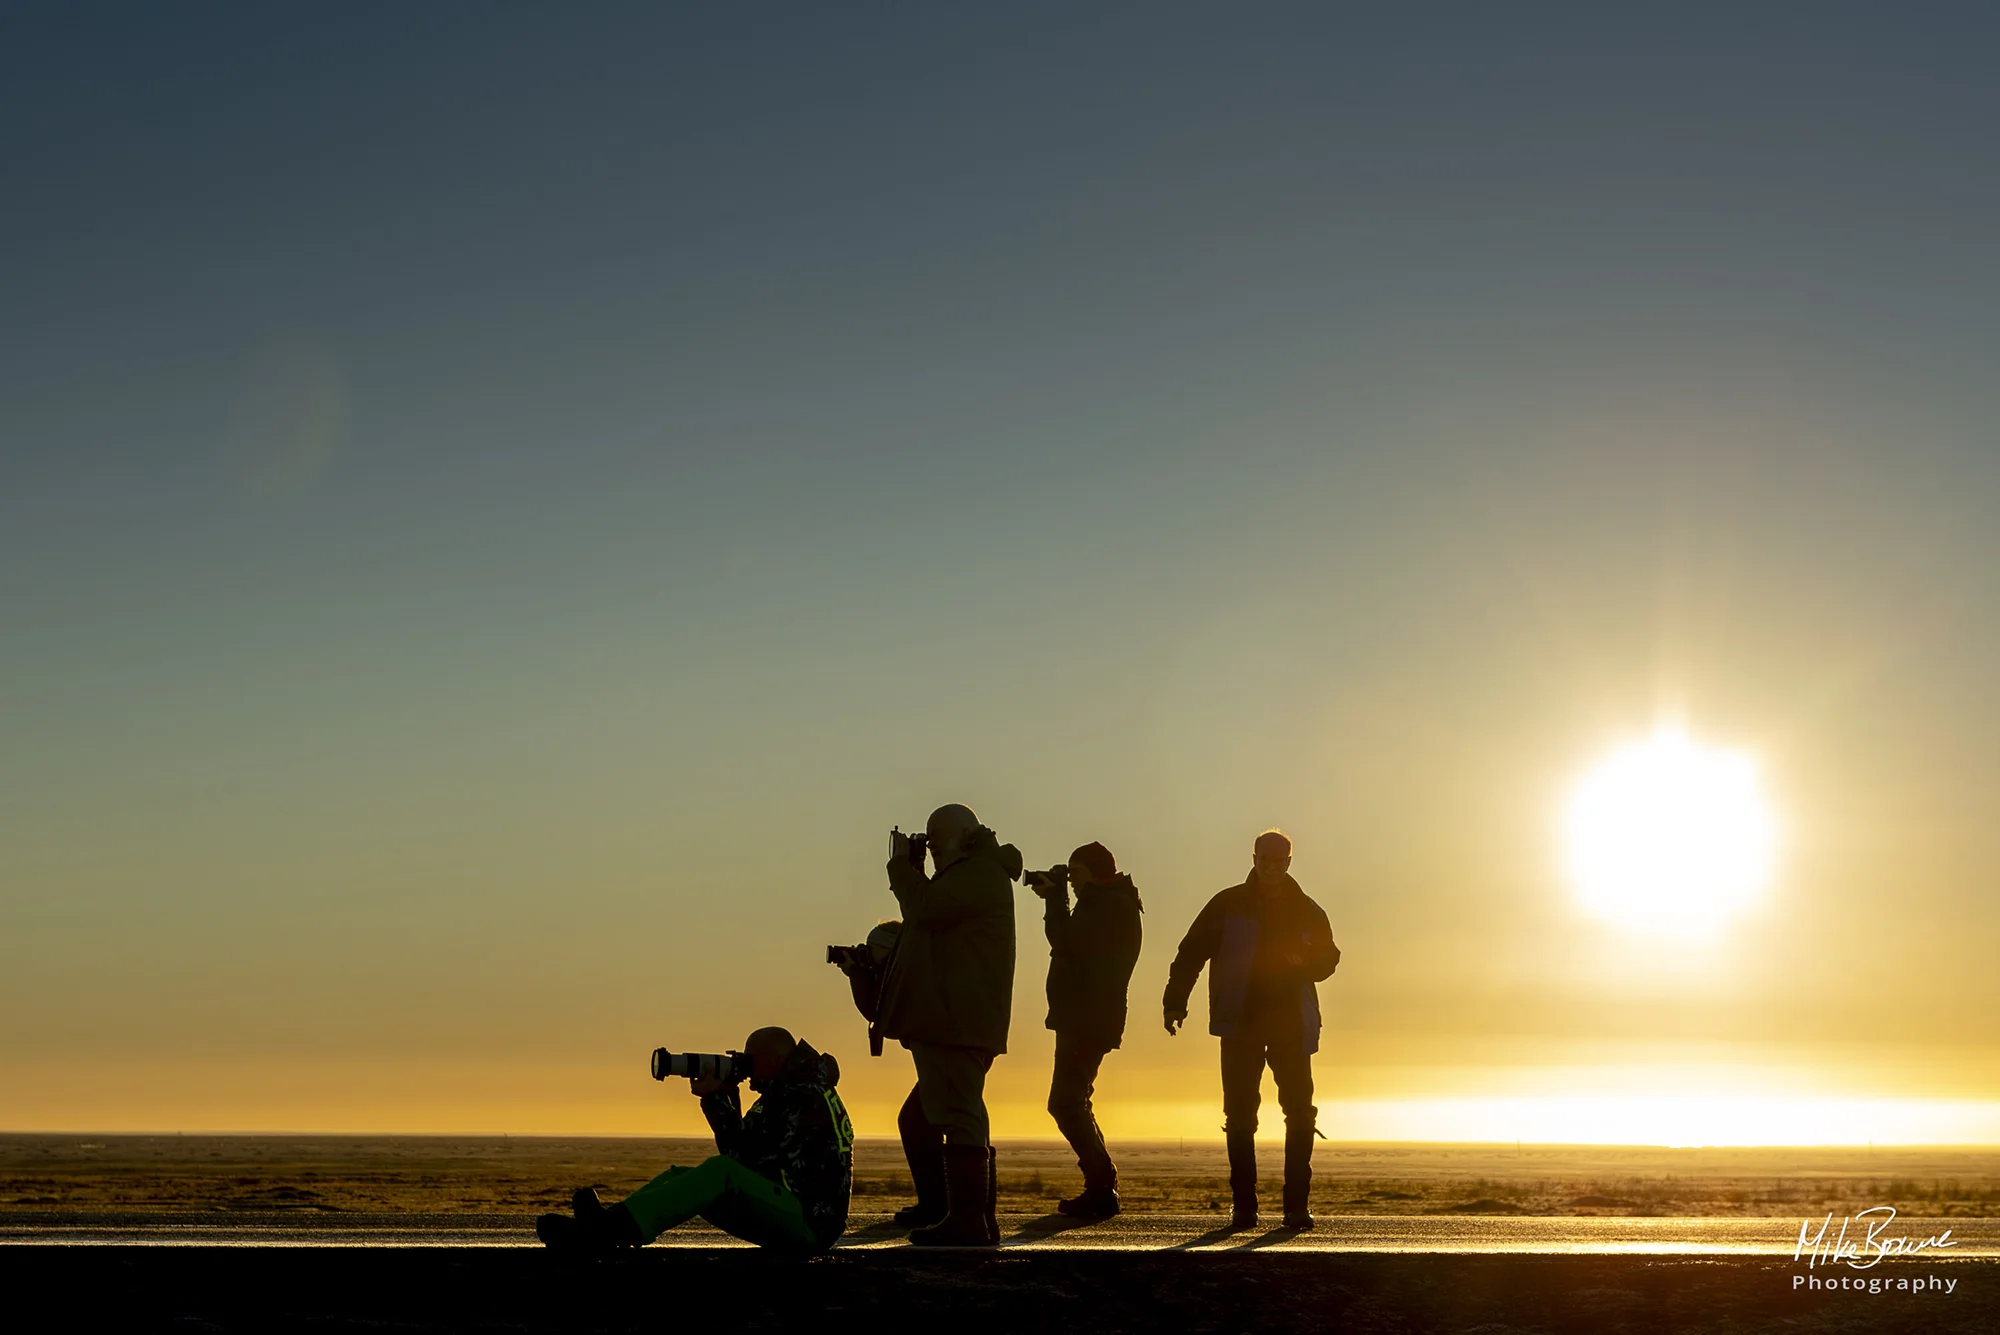 five photographers with cameras silhouetted against sunrise